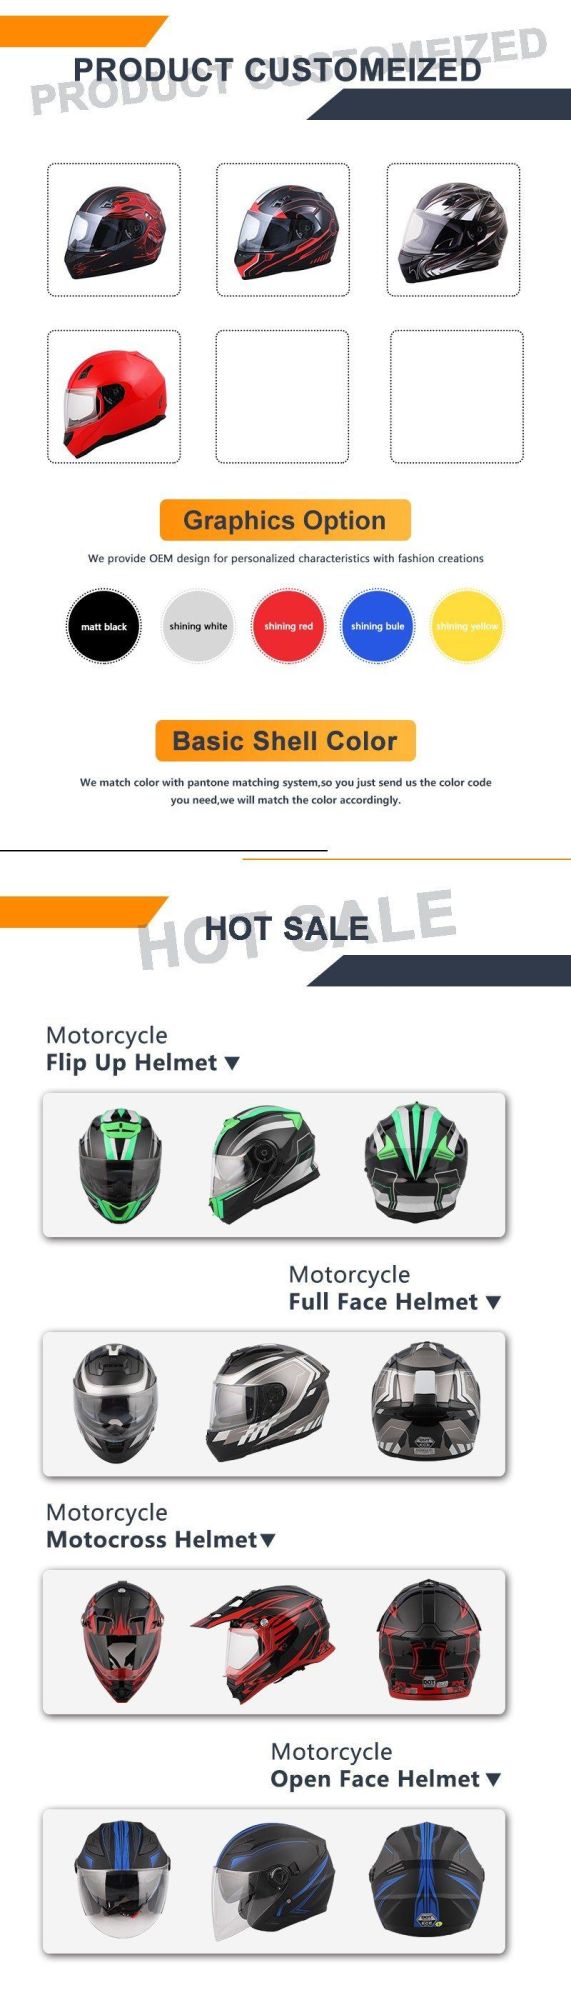 Hot Sale Motorcycle Safety Street Bike Full Face Helmet Protect Head